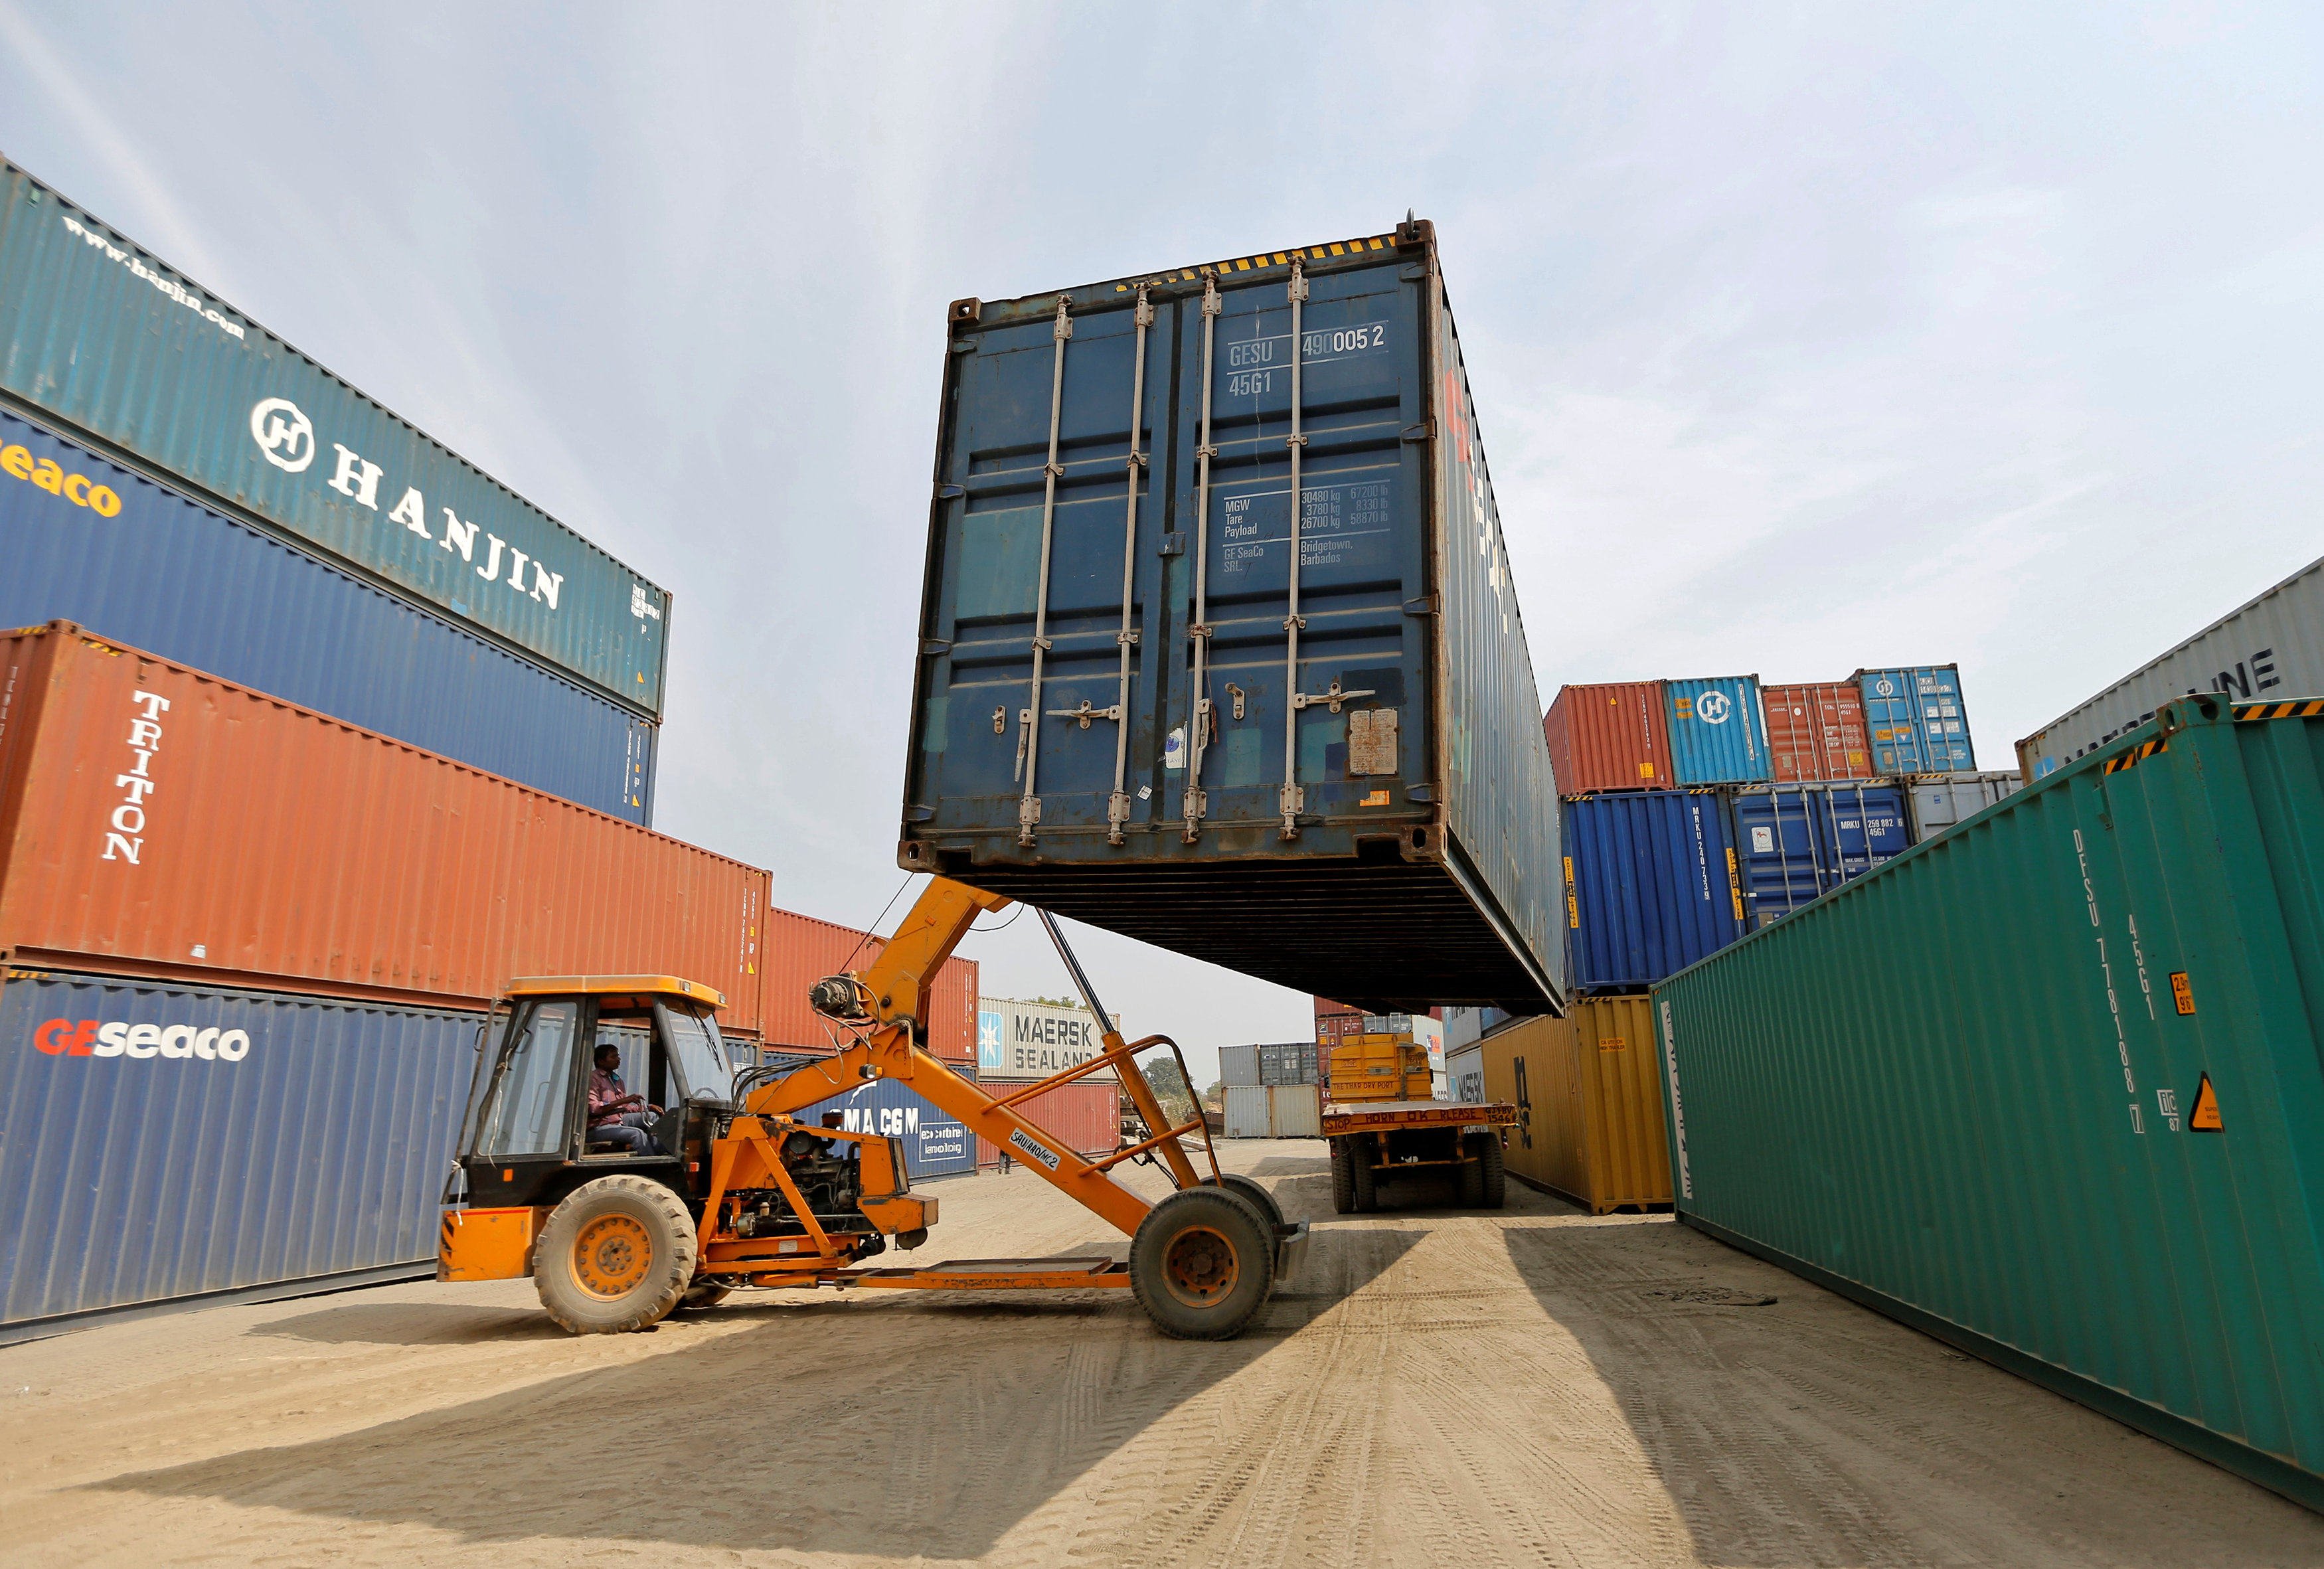 A crane moves containers at a “dry port” in India’s Gujarat state. The new deepwater port at Vadhavan will be one of the world’s largest once completed. Photo: Reuters